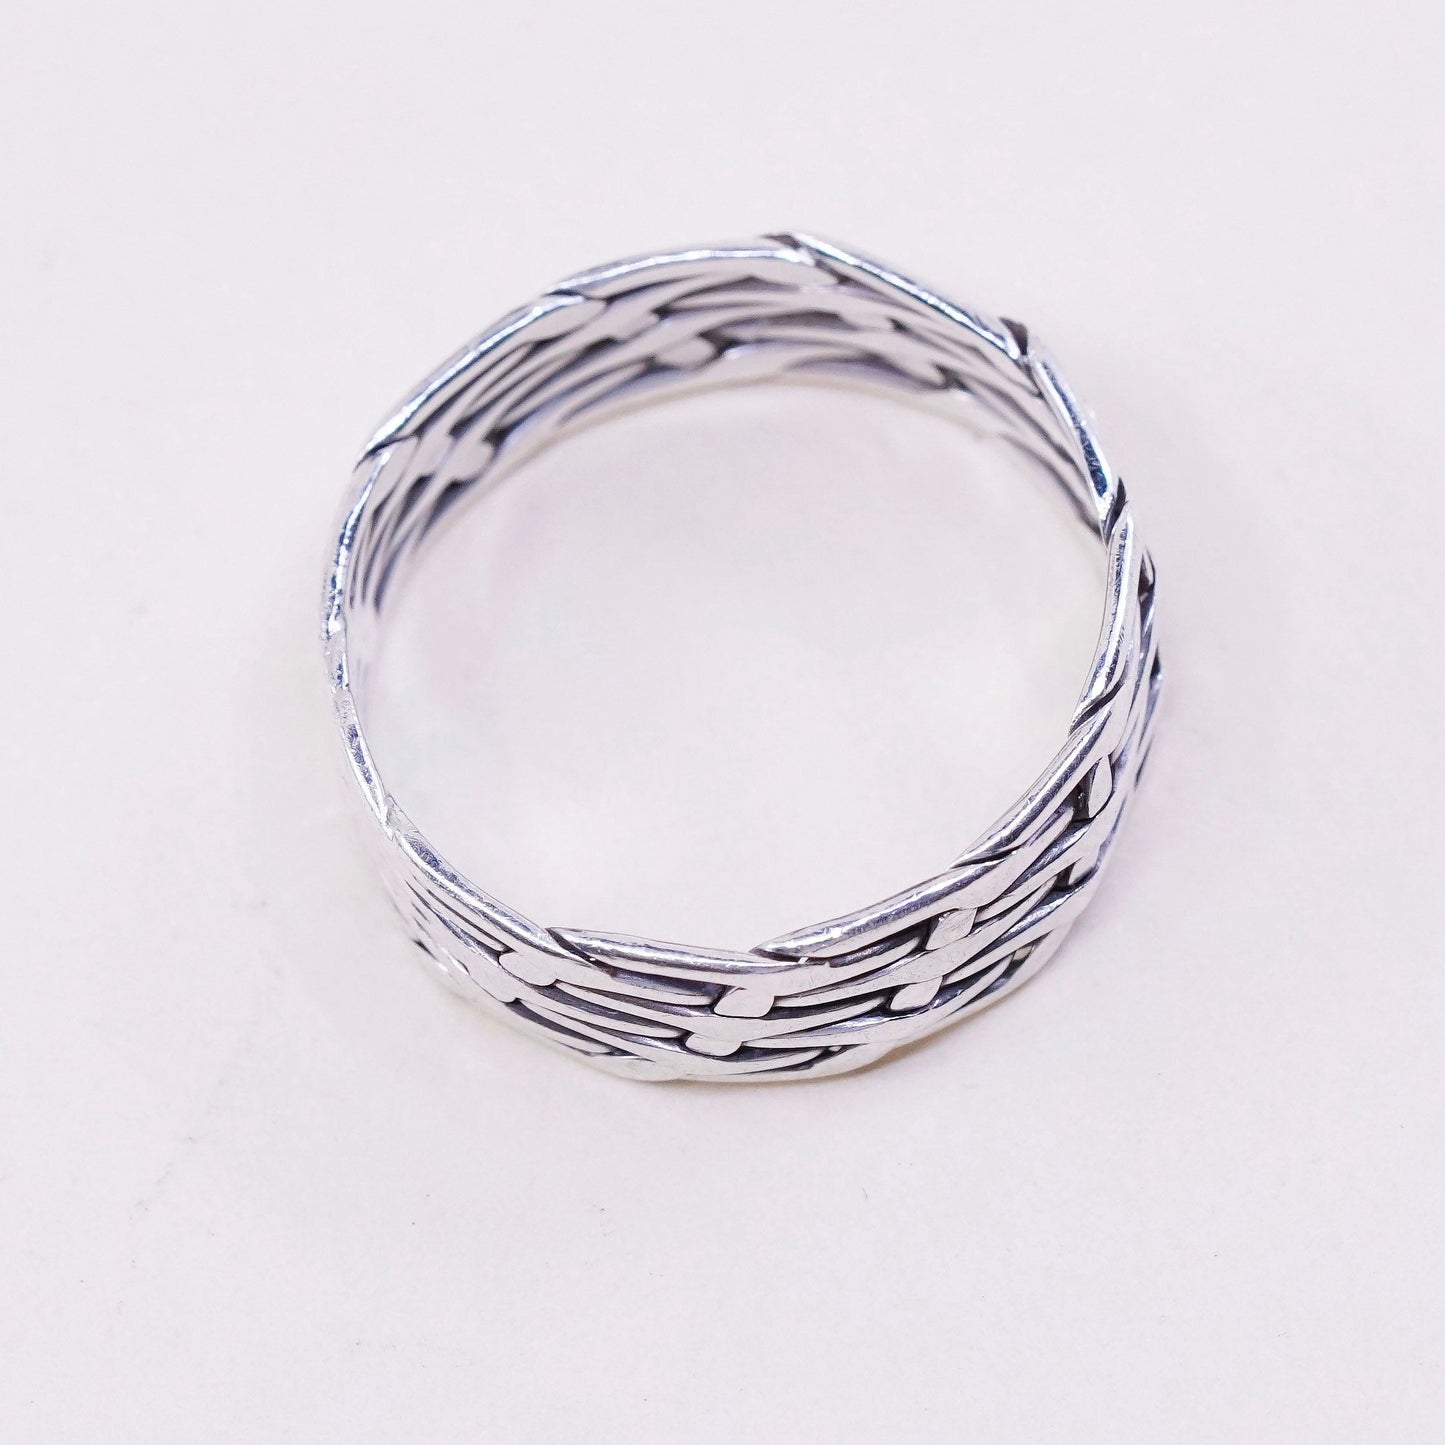 Size 7.25, vintage Sterling silver handmade ring, 925 woven cable band